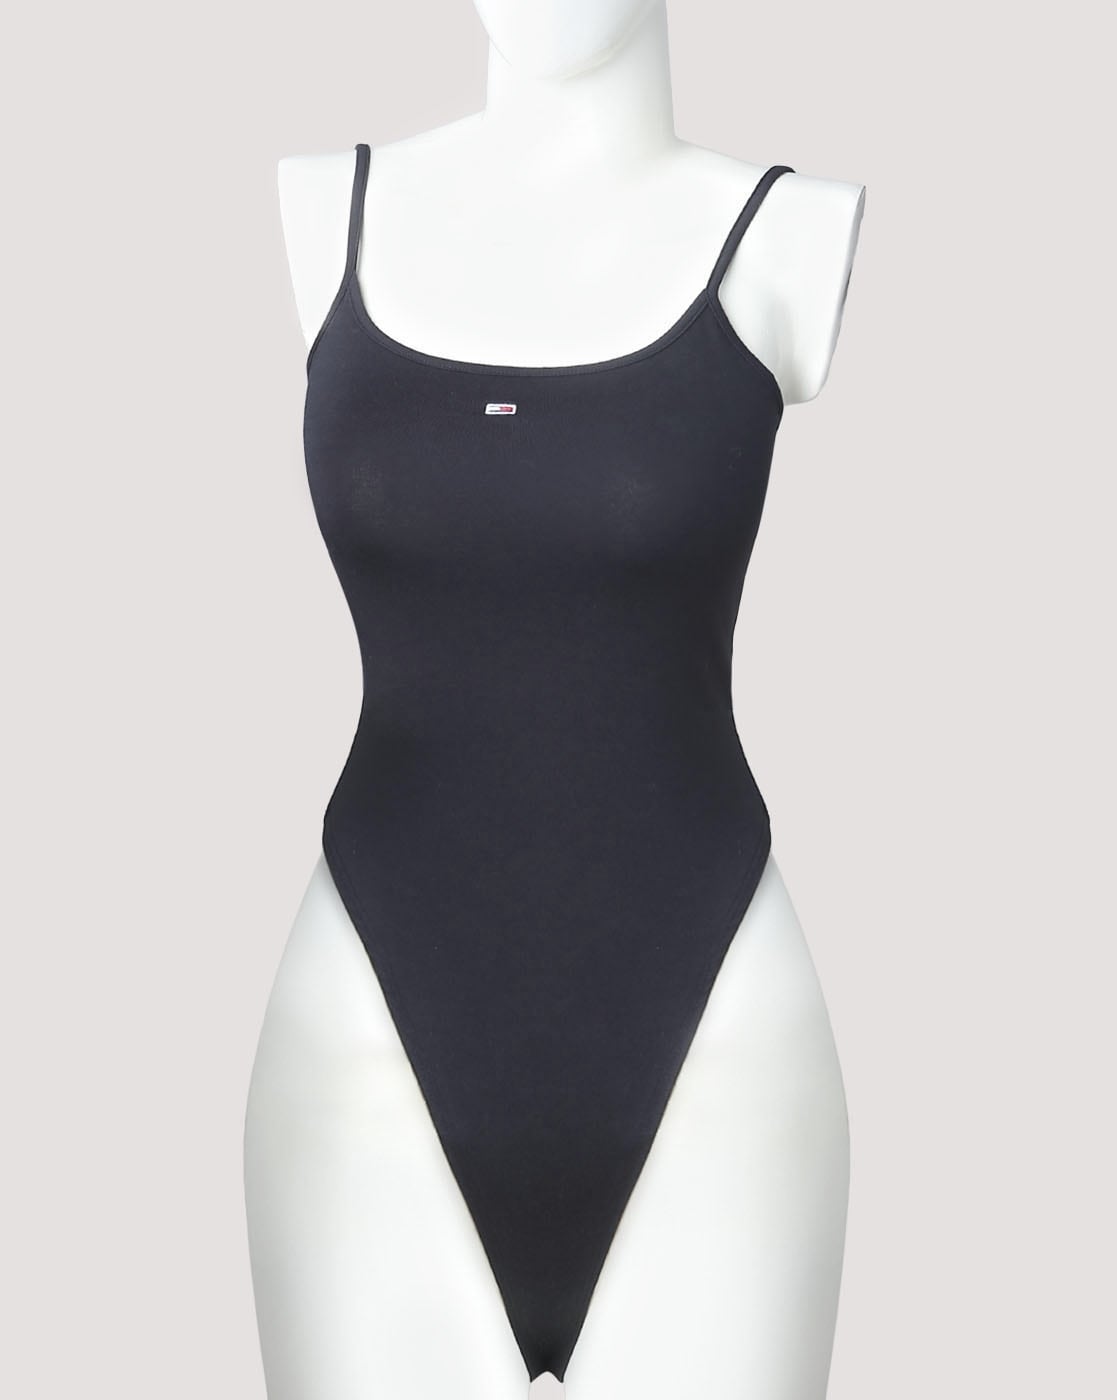 Buy Black Tops for Women by TOMMY HILFIGER Online